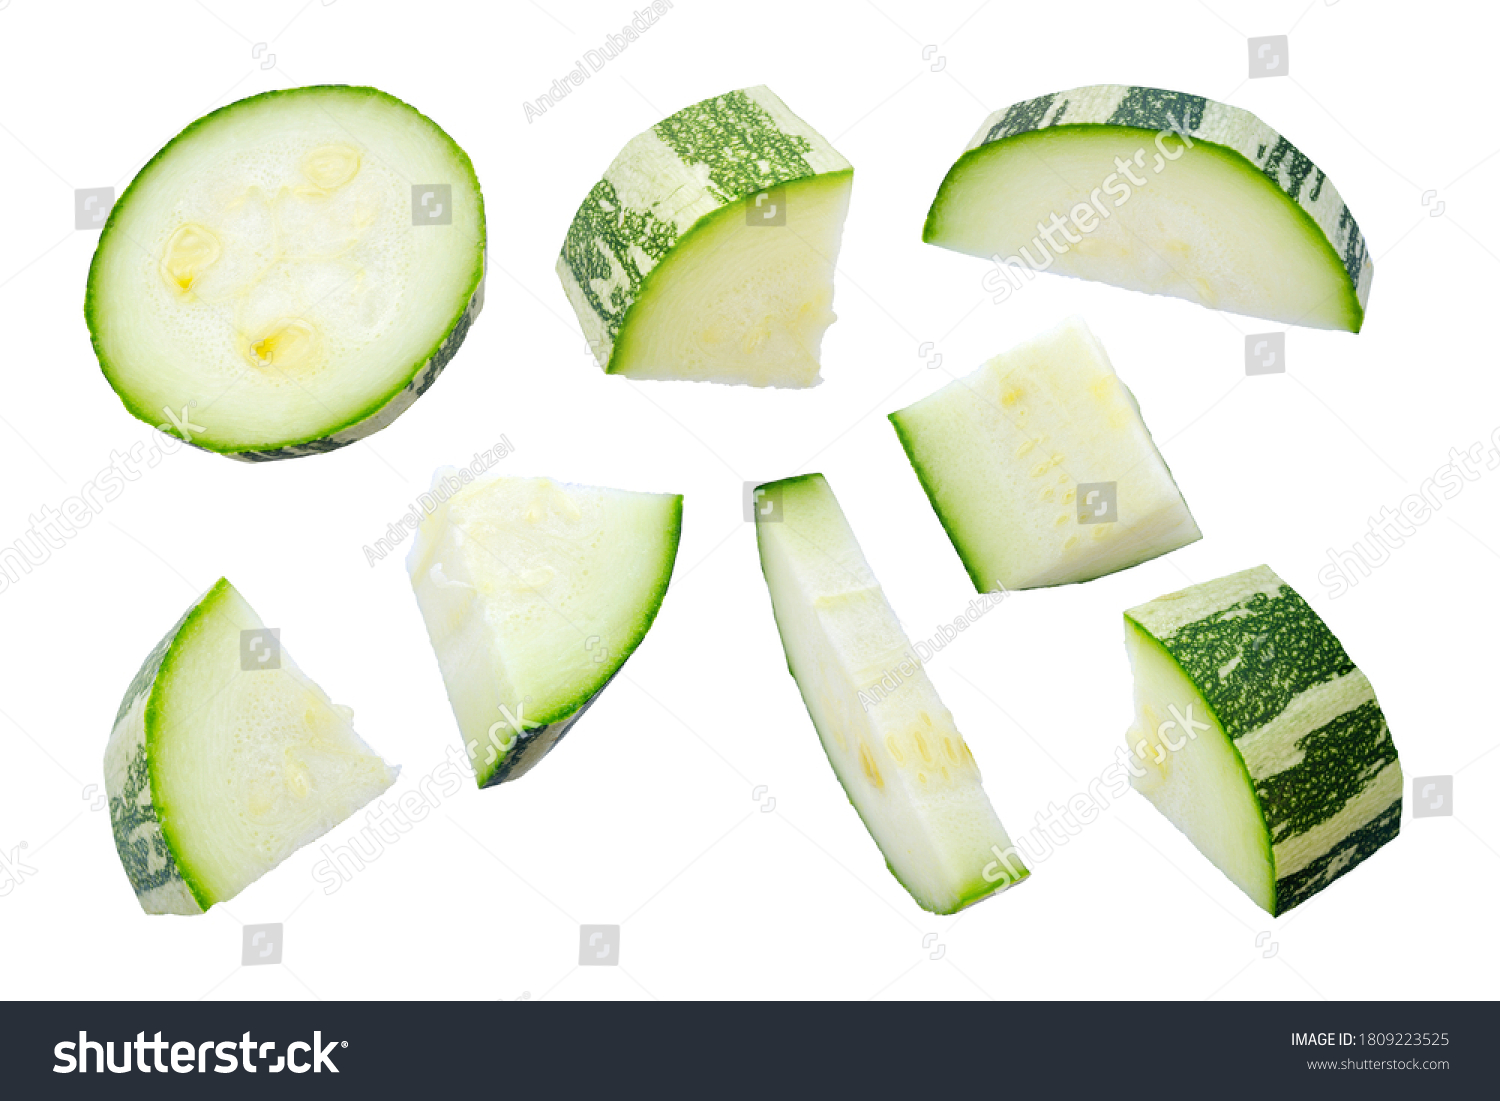 Zucchini slices isolated on a white background, top view. Sliced zucchini, courgette isolated on white. Pieces of zucchini, top view. Diced zucchini, closeup. Set of pieces of courgette. #1809223525